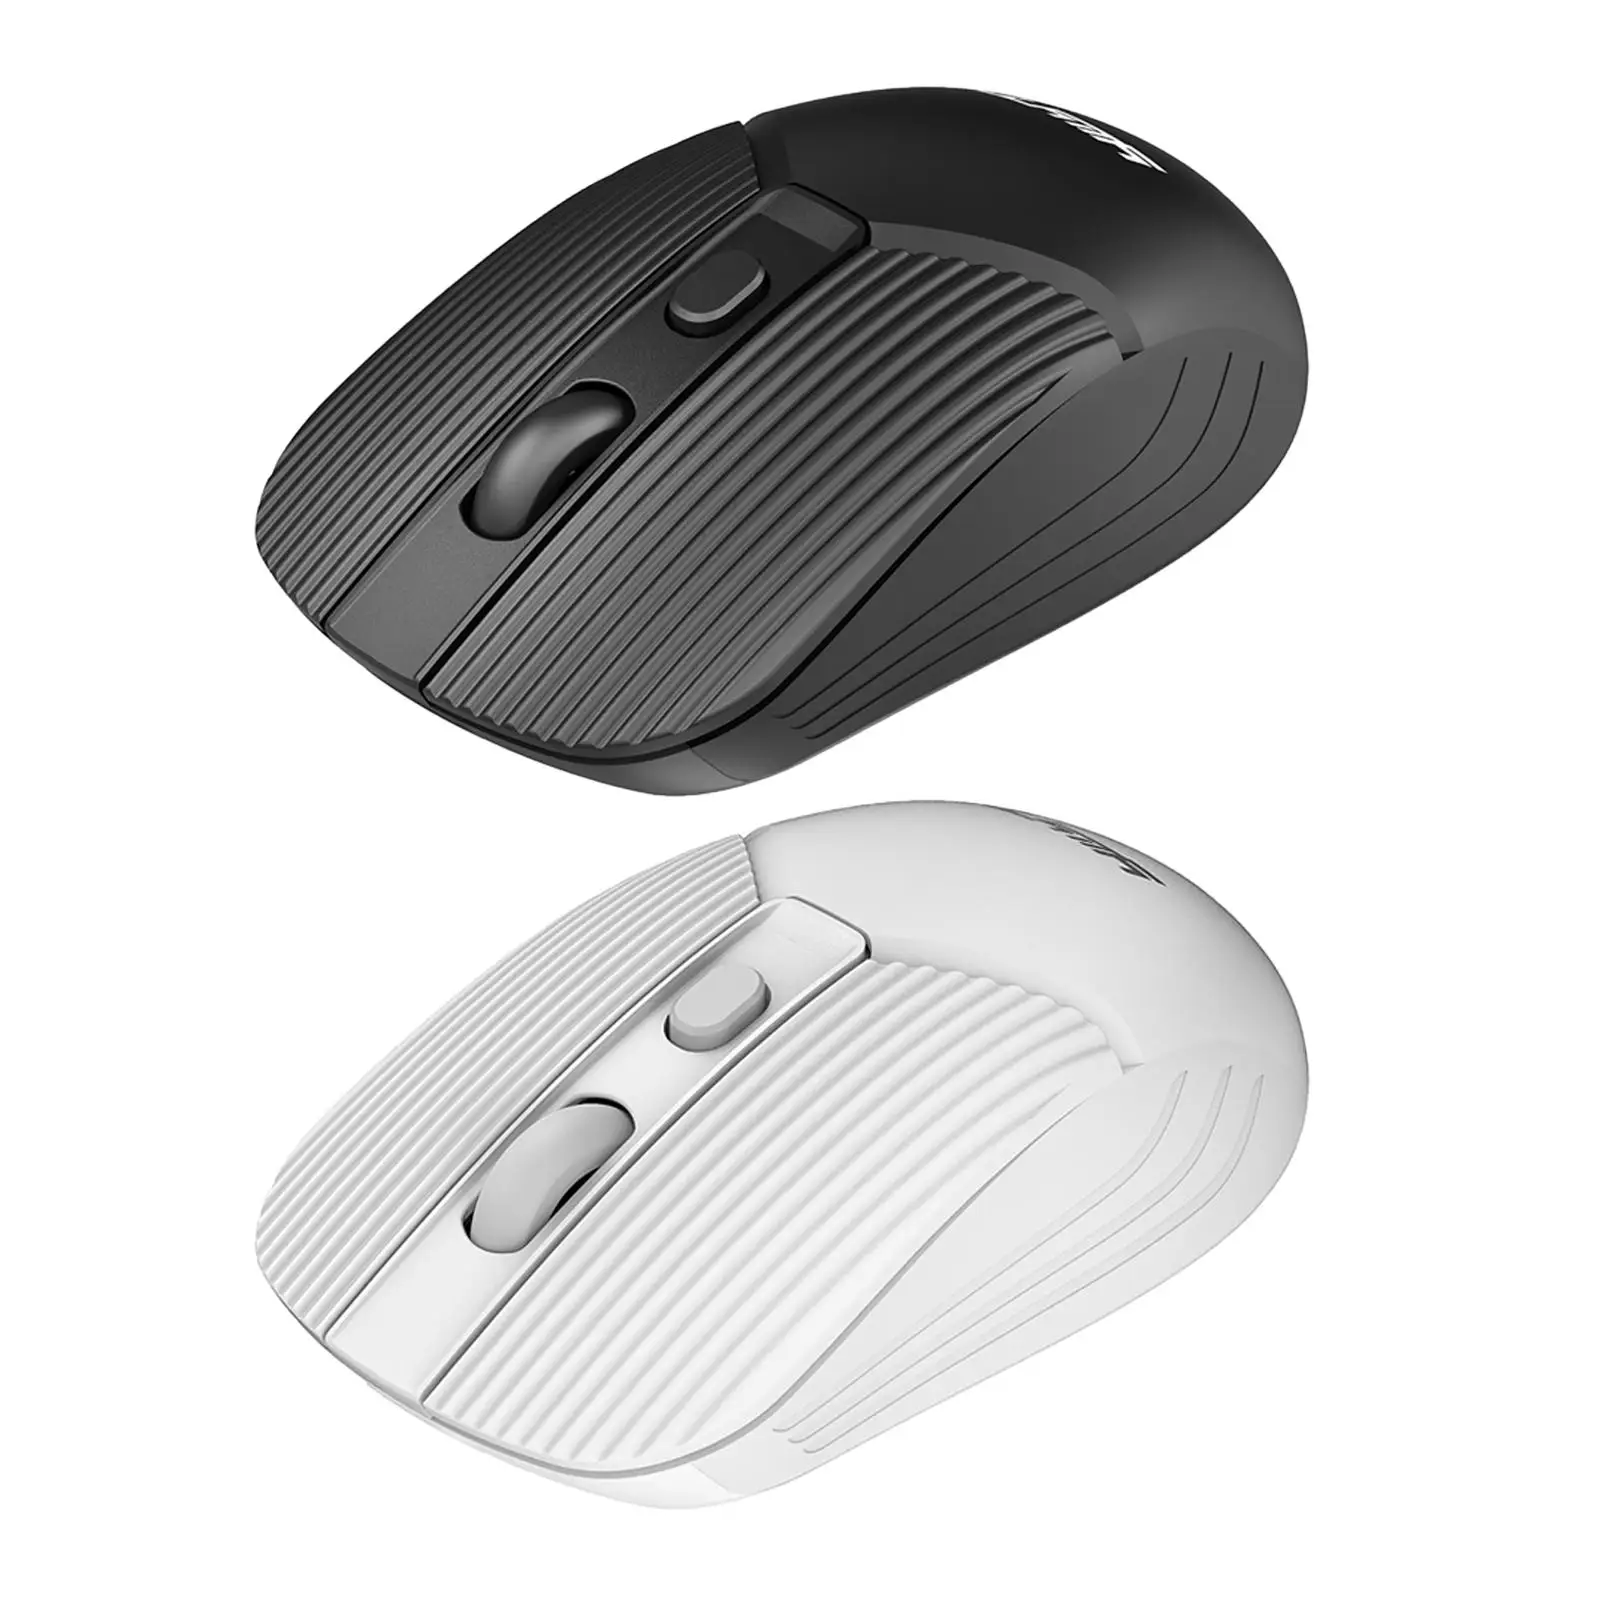 Portable 2.4G Wireless Mouse Silent Cordless Mice Thin Optical Mouse for Laptop Notebook Travel 3 Adjustable DPI Battery Powered